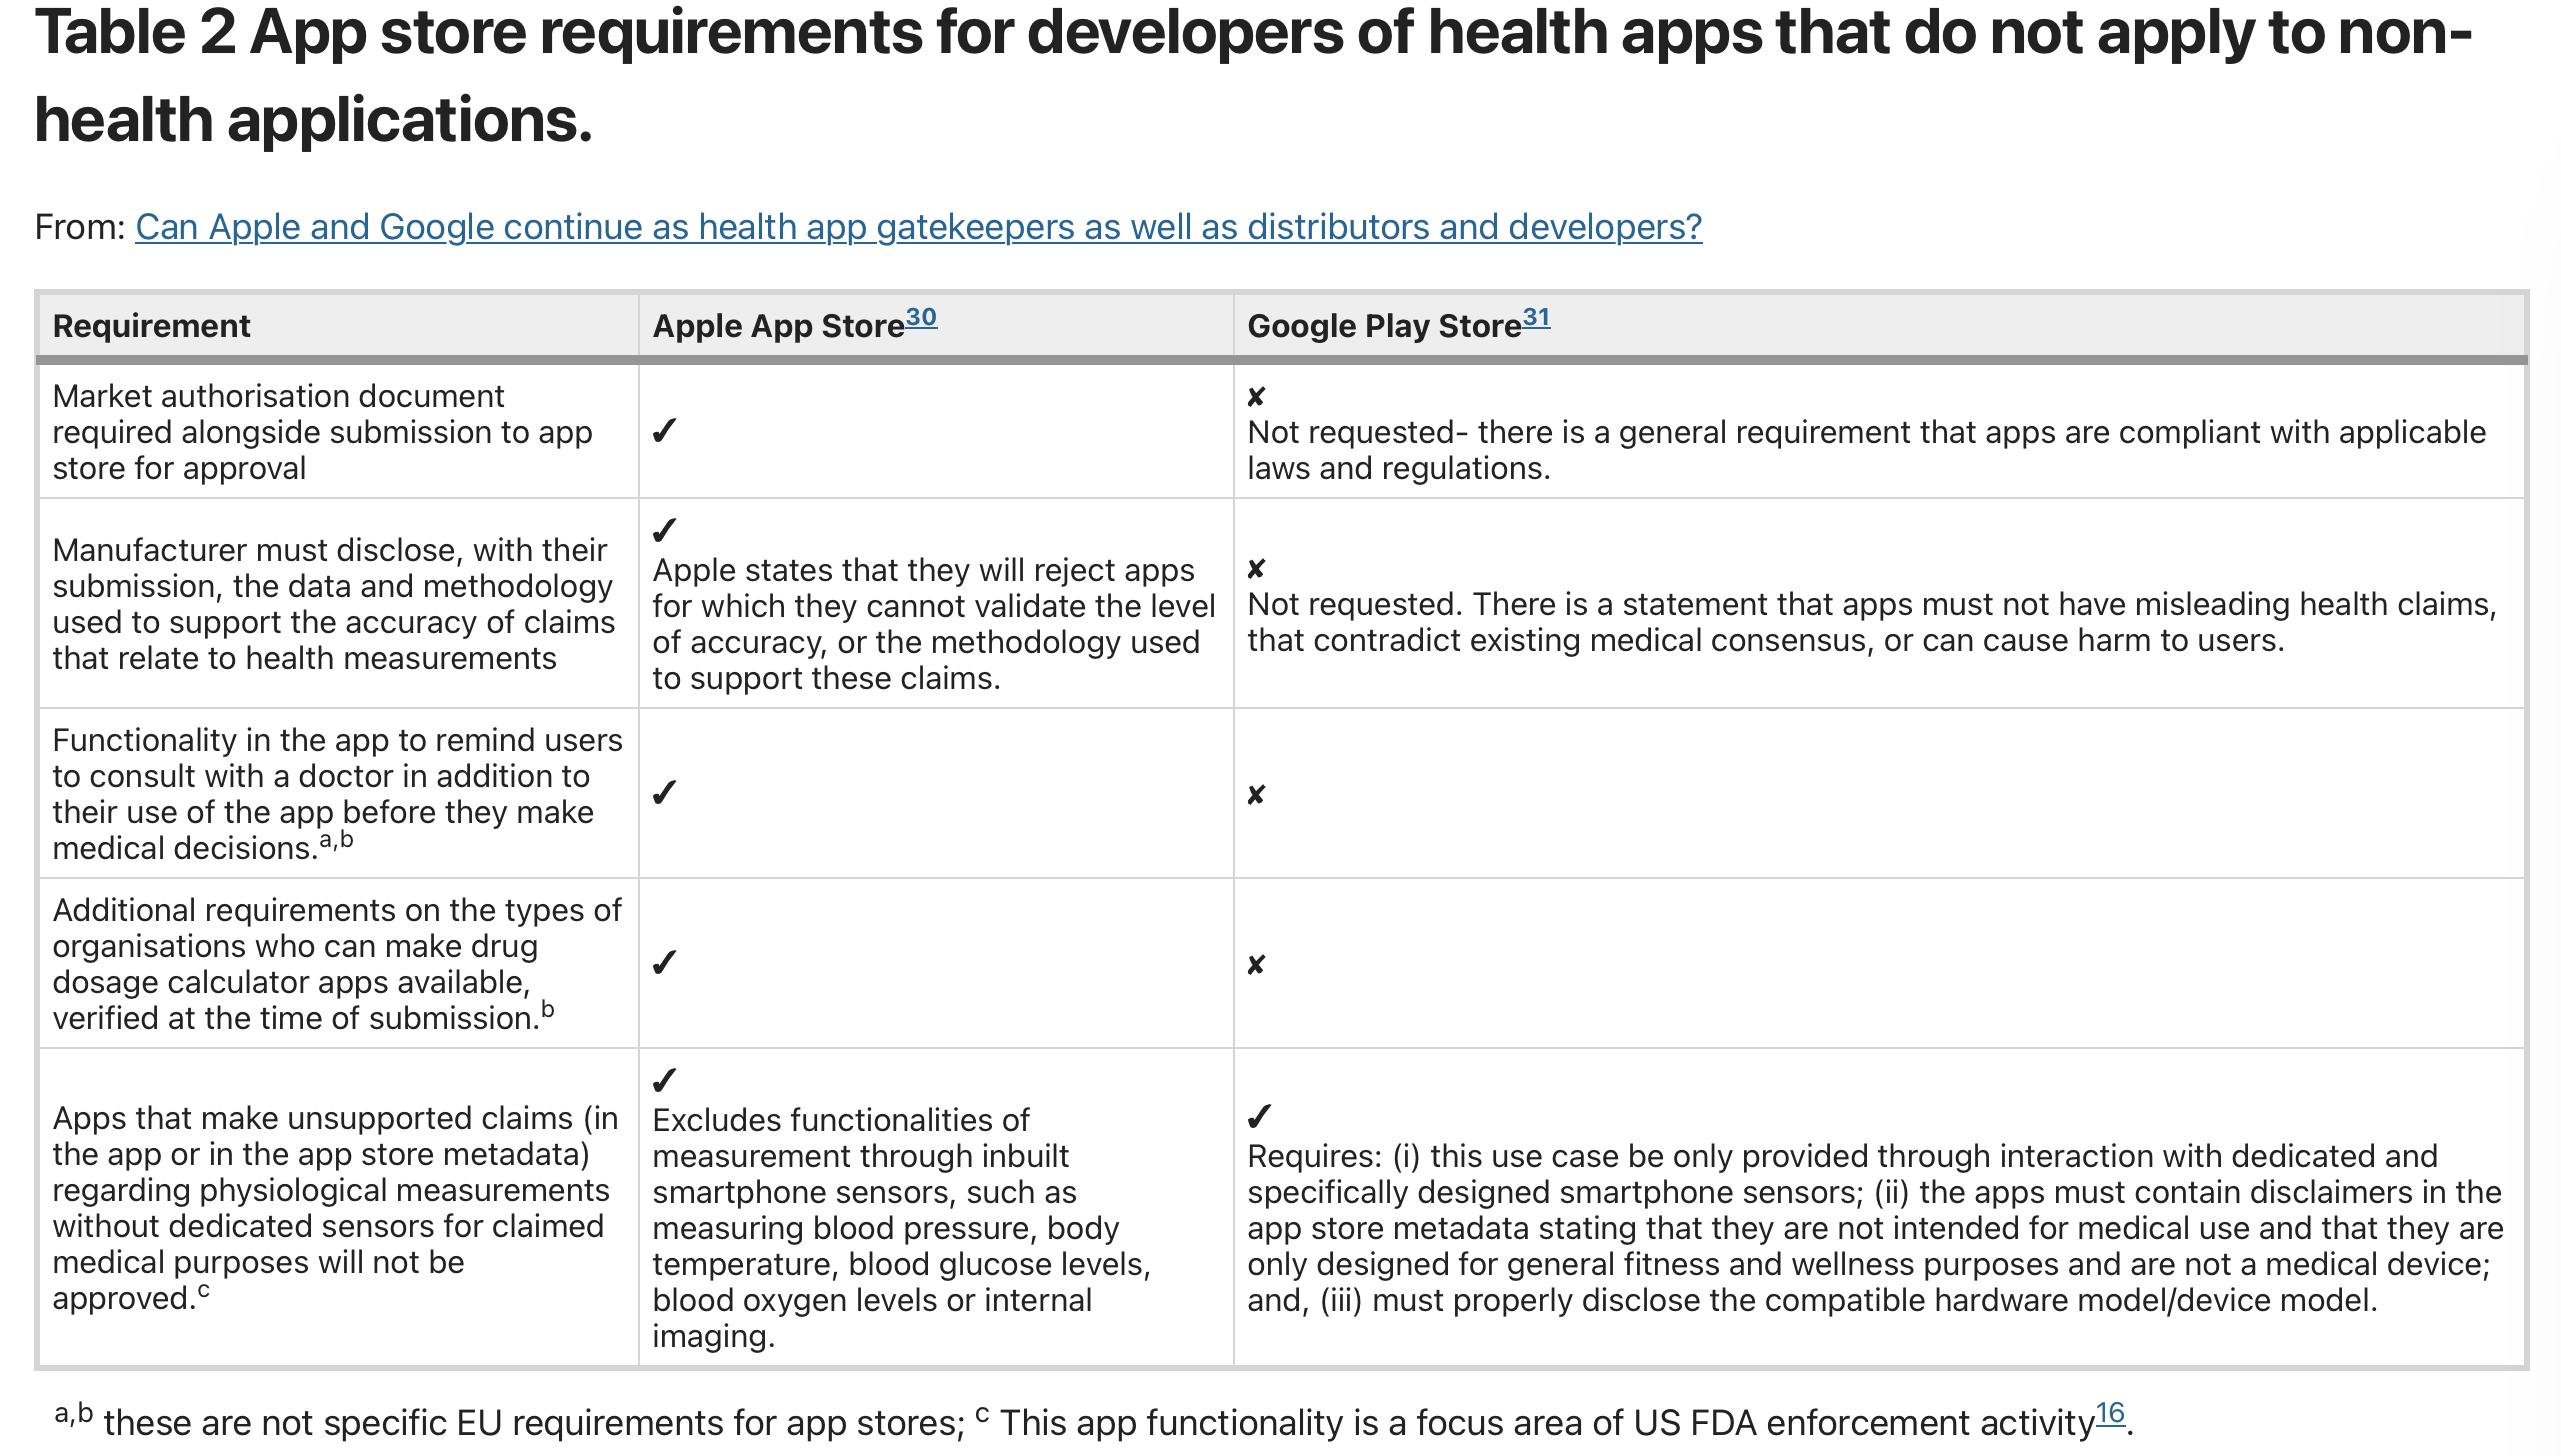 Can Apple and Google continue as health app gatekeepers as well as  distributors and developers?